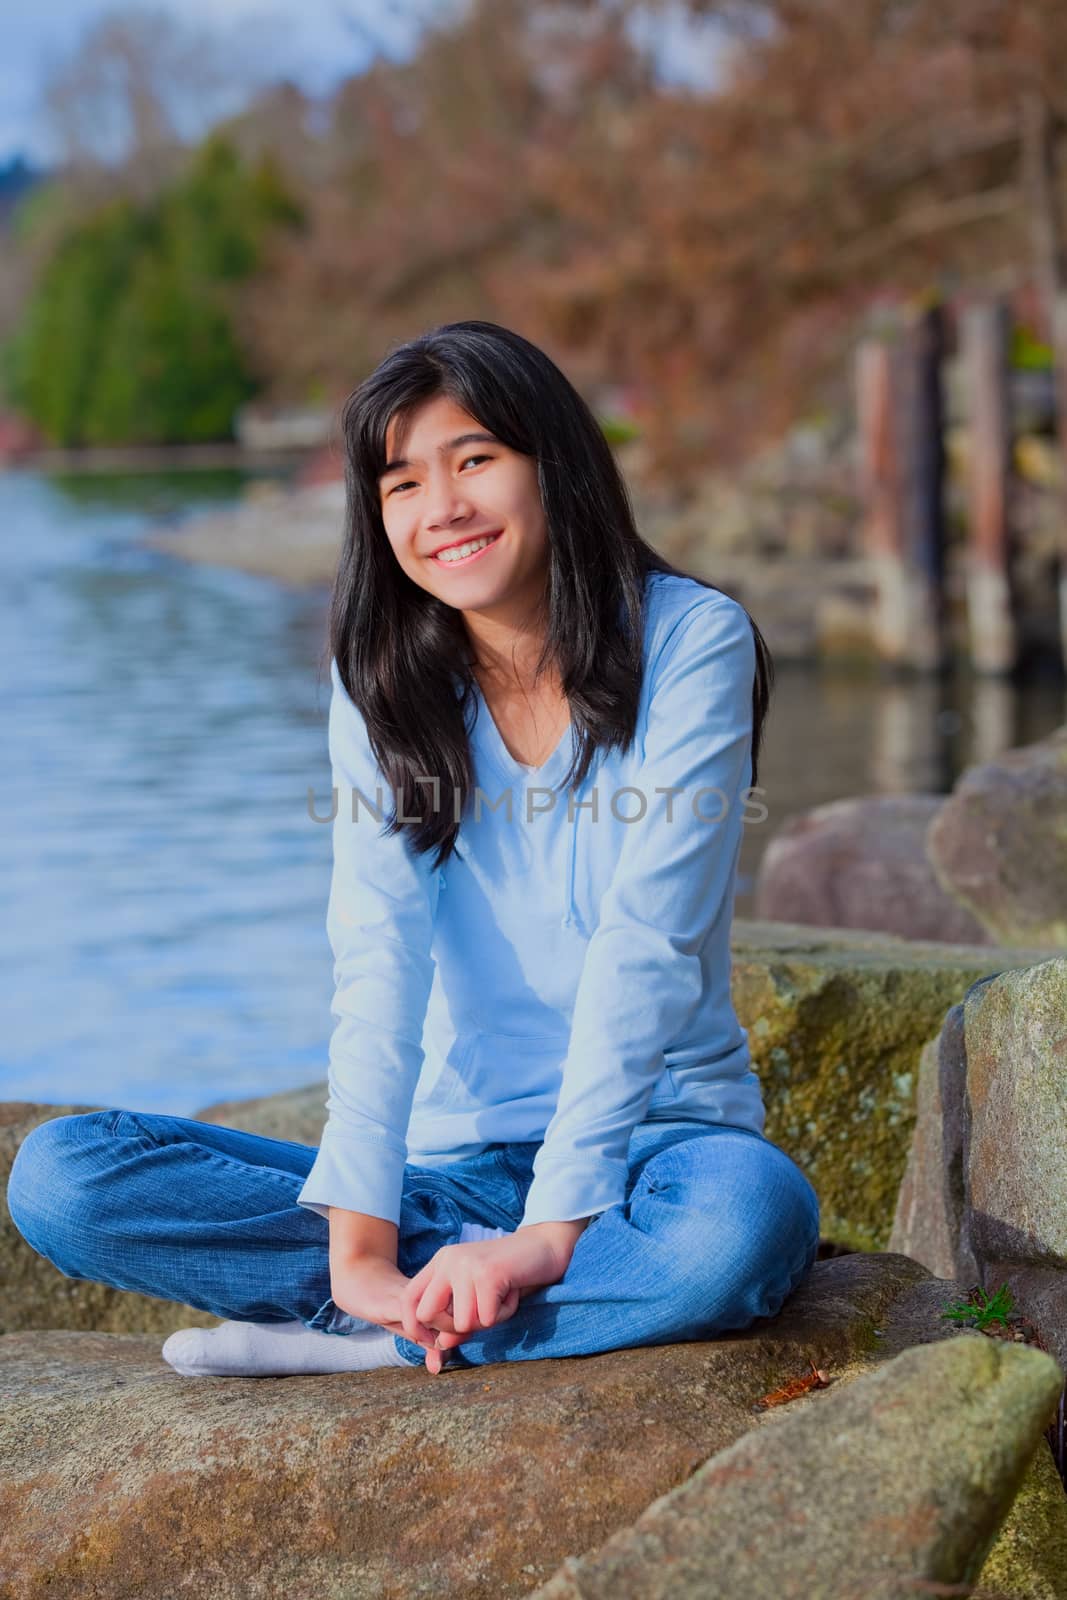 Young biracial teen girl in blue shirt and jeans sitting on large boulder or rocks along rocky lake shore, smiling and reclining